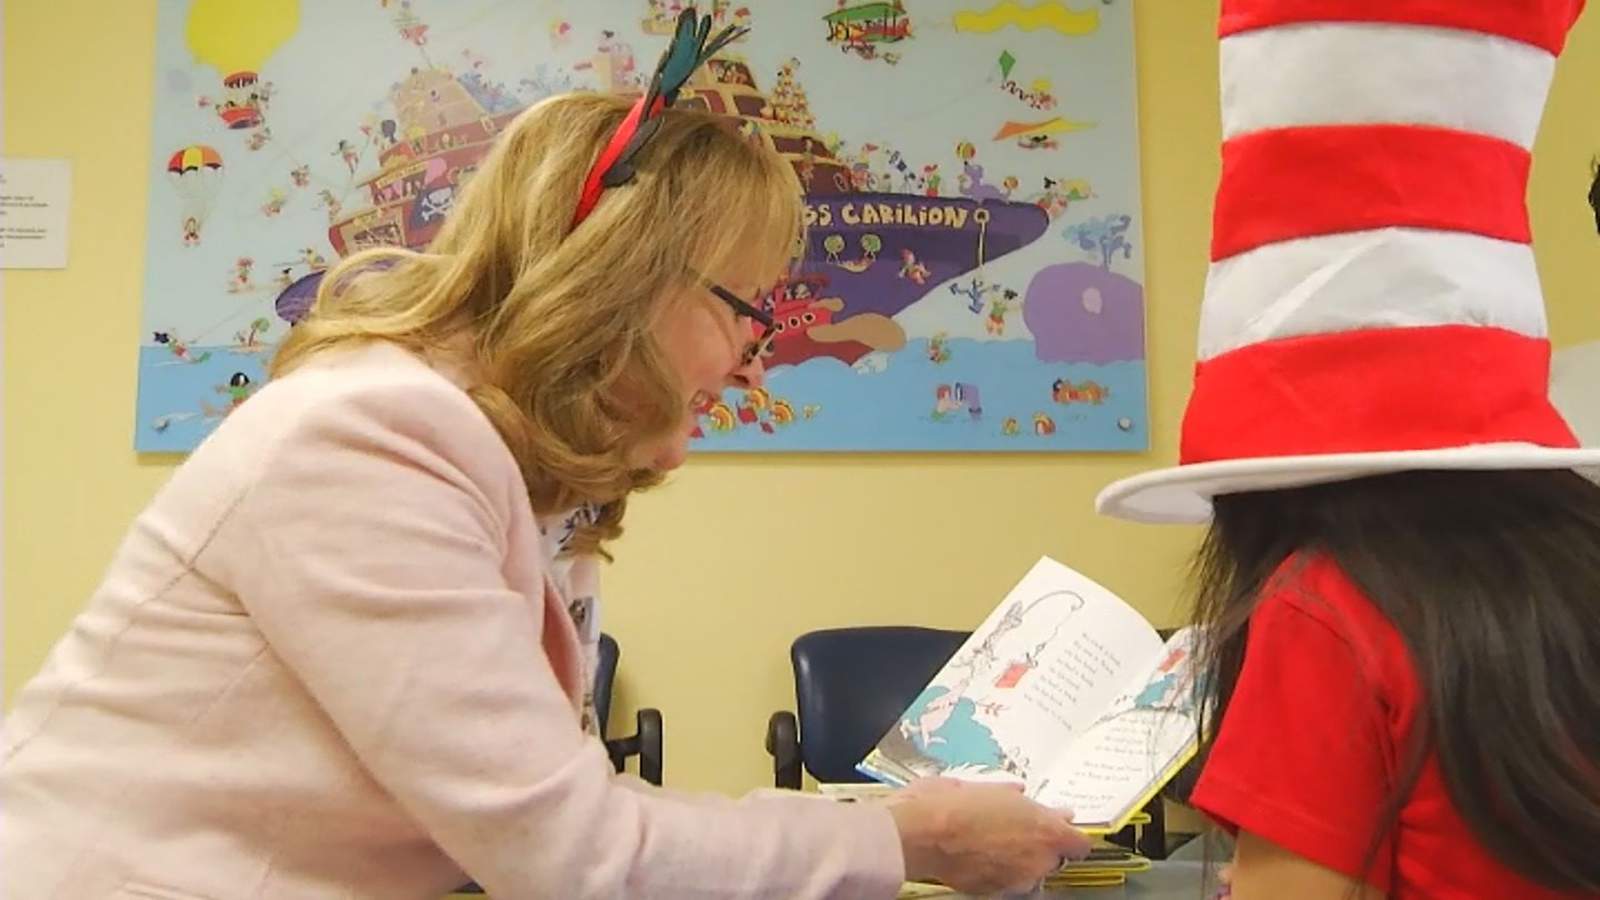 Carilion pays tribute to Dr. Seuss with celebration of Reach Out and Read program